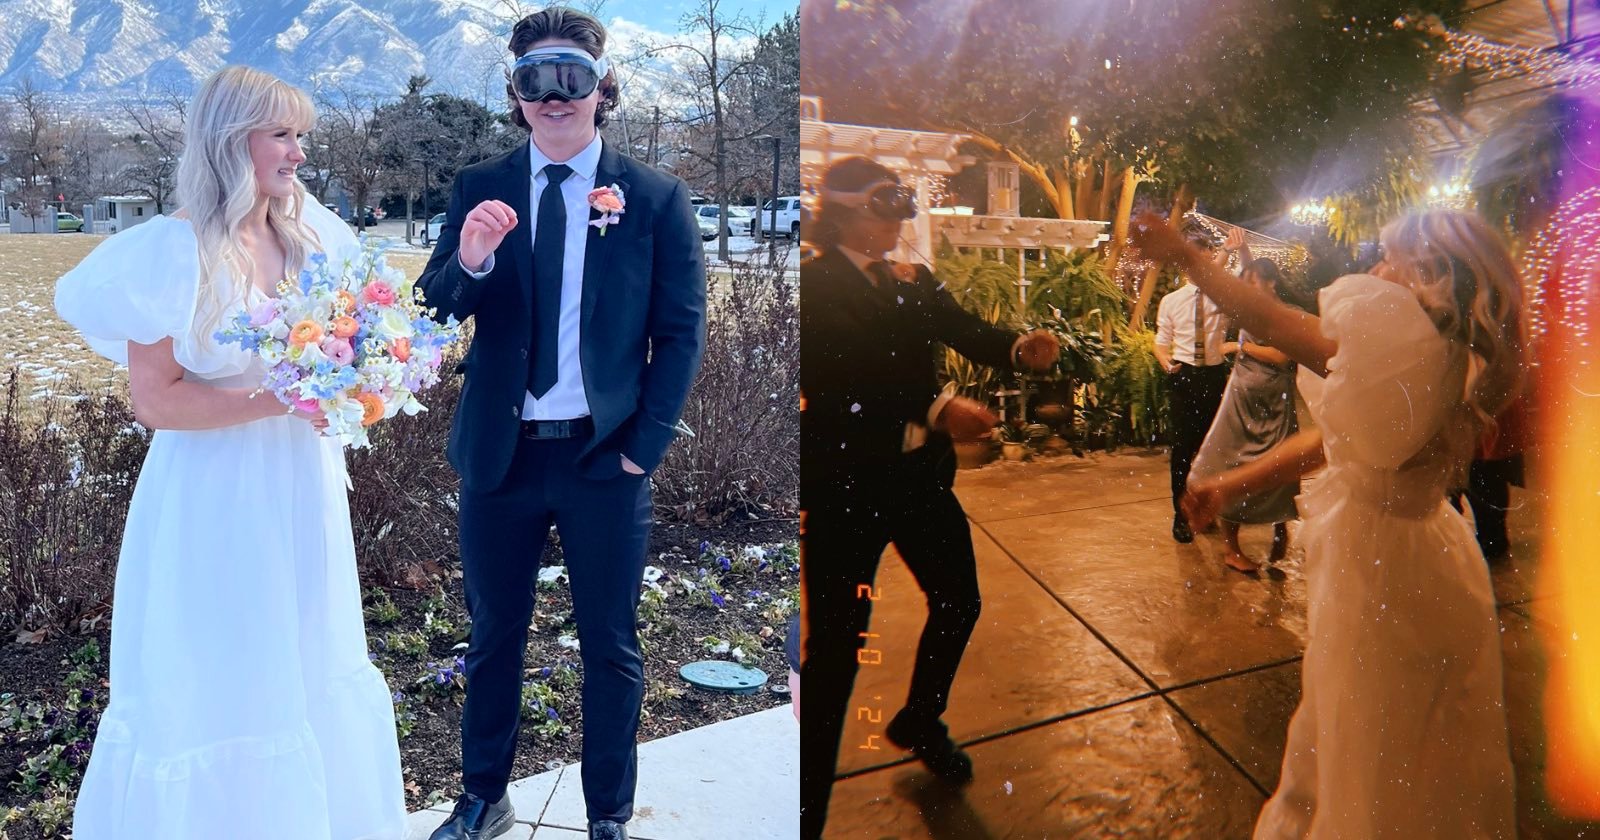 Groom Wears Apples Vision Pro Headset on His Wedding Day